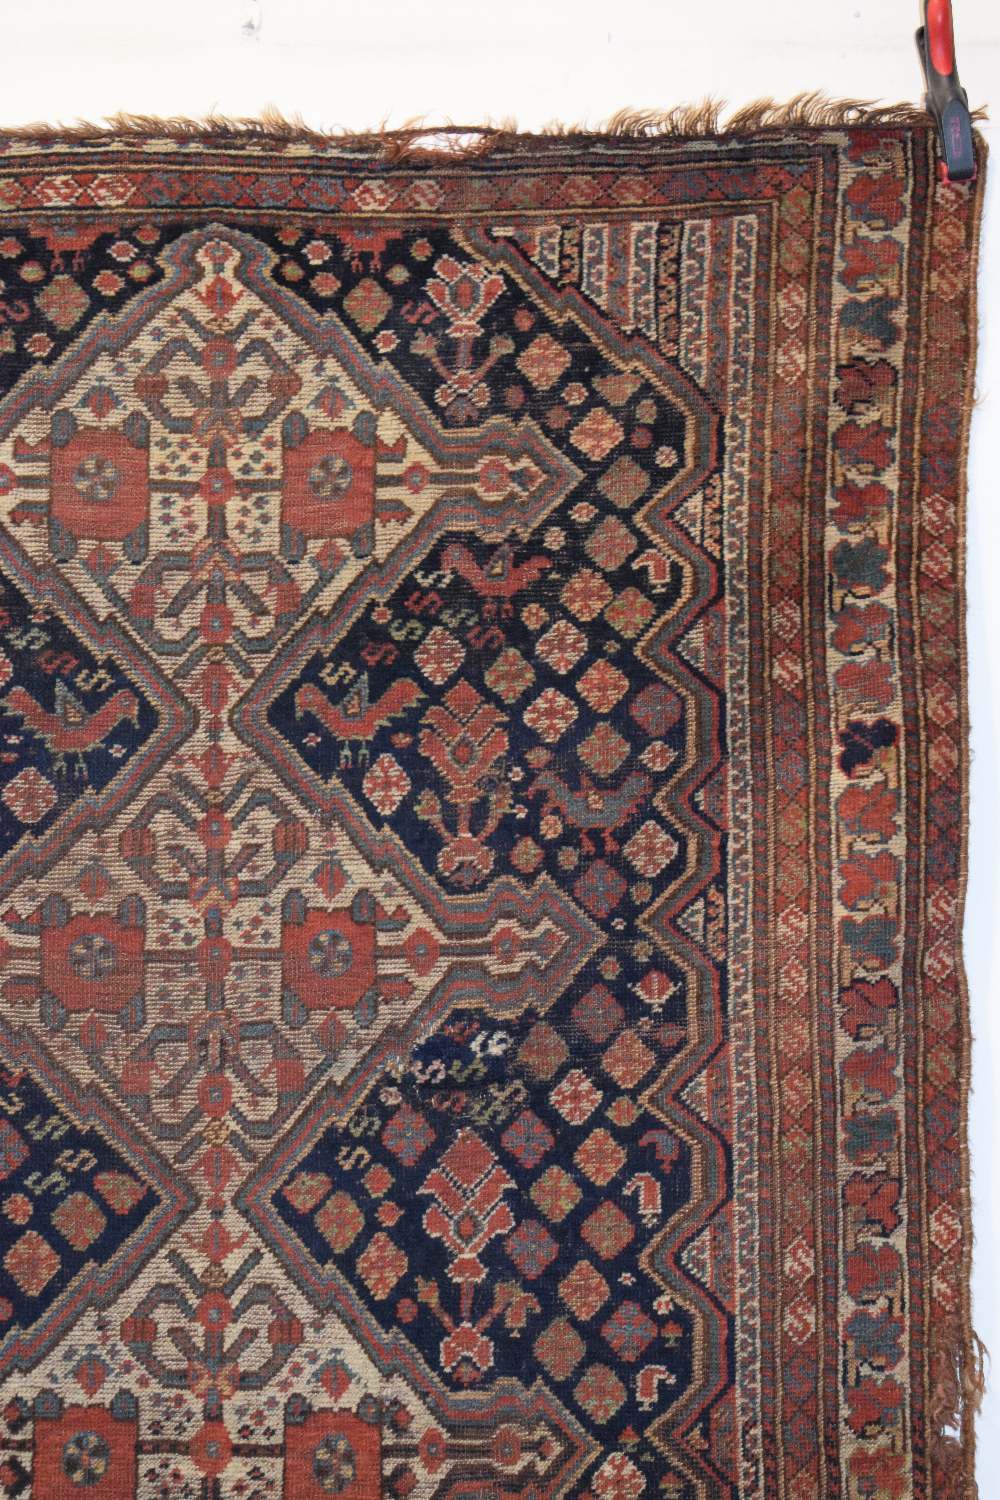 Two Khamseh rugs, Fars, south west Persia, early 20th century, the first 4ft. 11in. X 4ft. 6in., 1. - Image 17 of 30